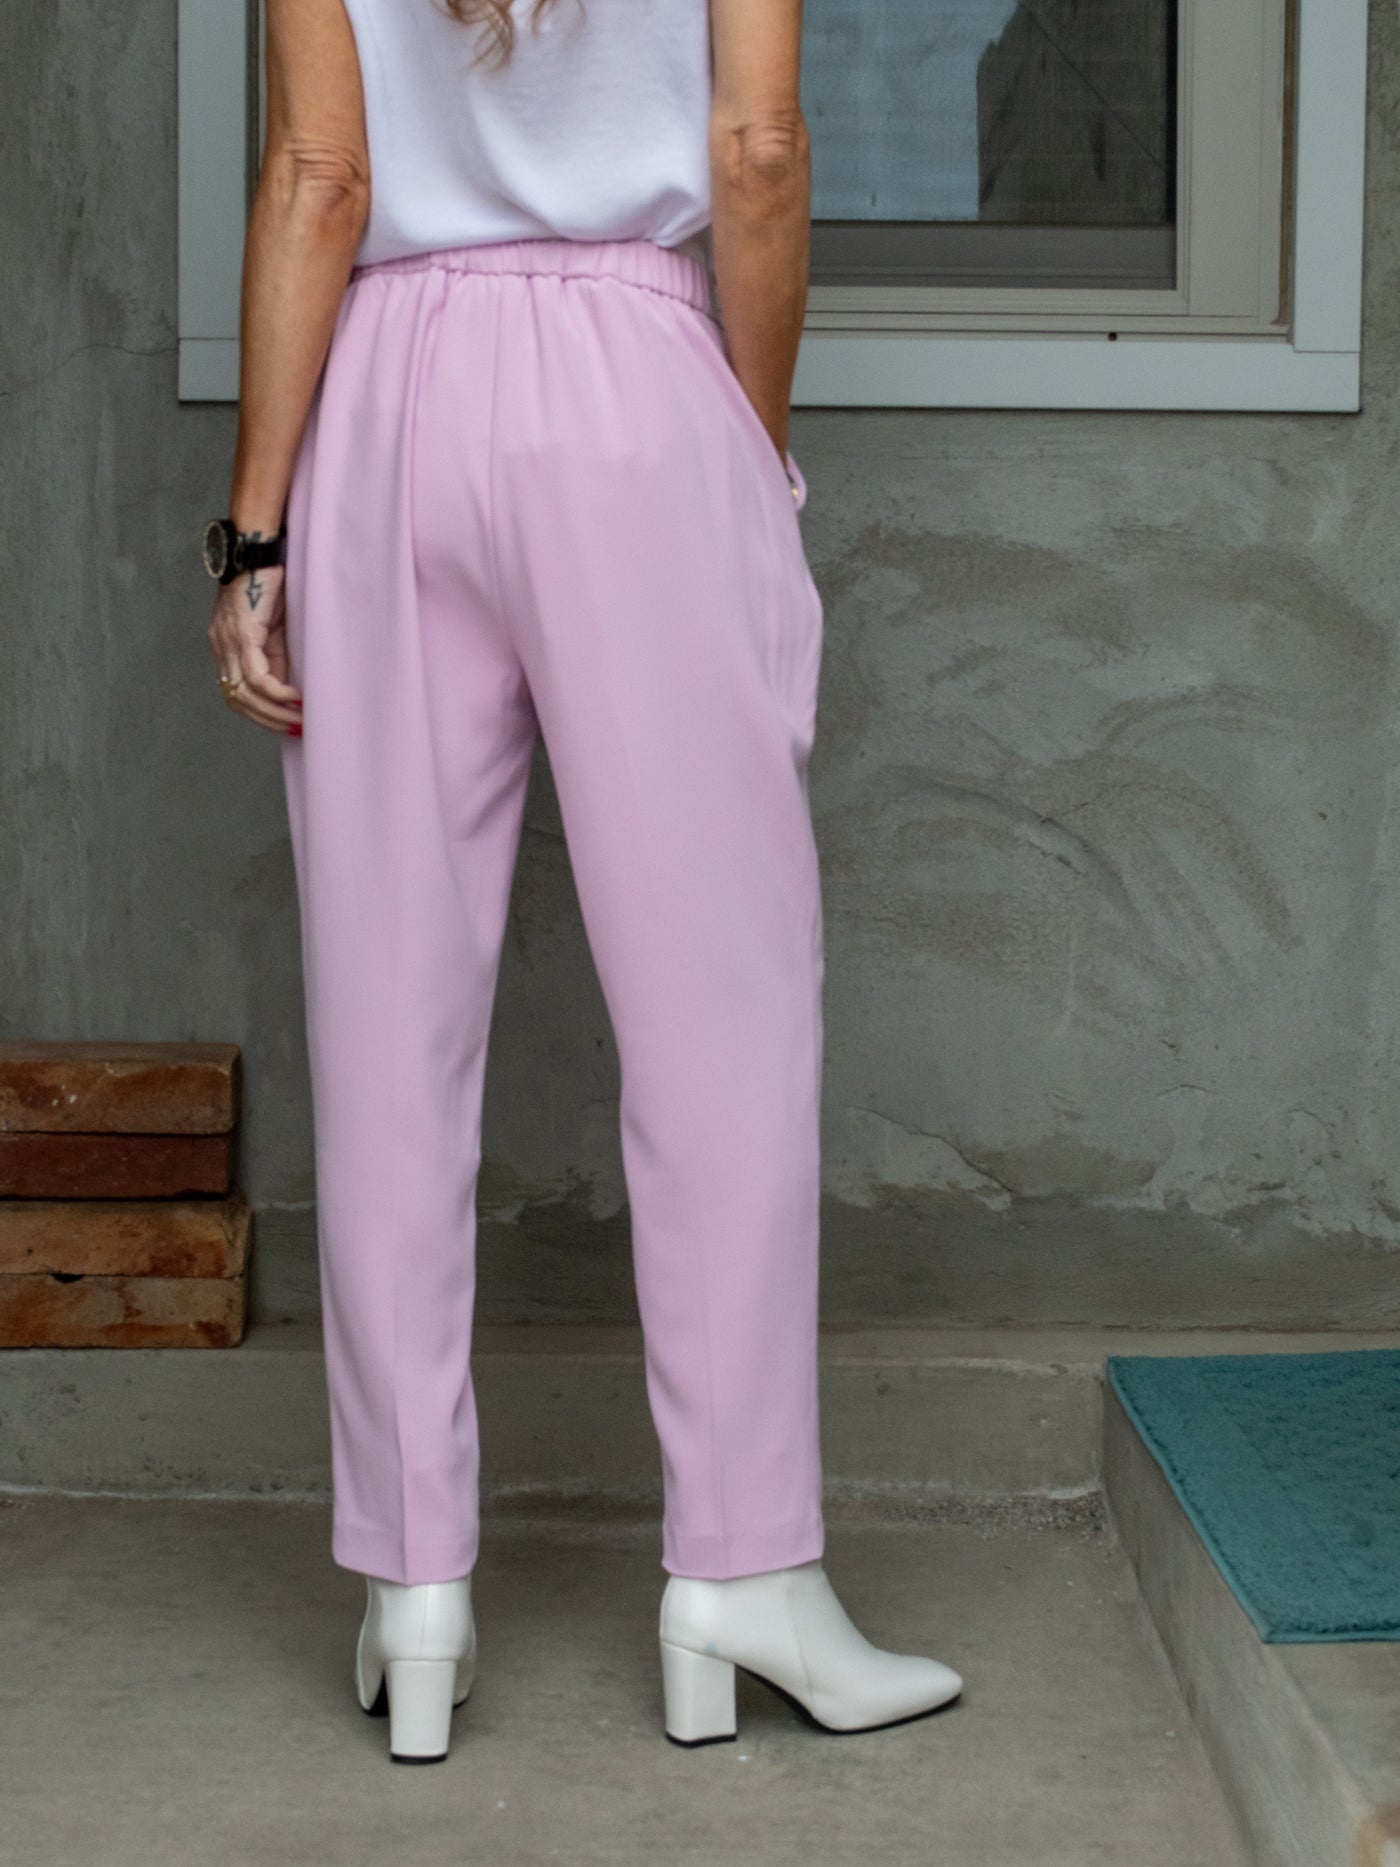 A model wearing lilac purple fitted pull on style pants with a matching blazer and v neck white top.